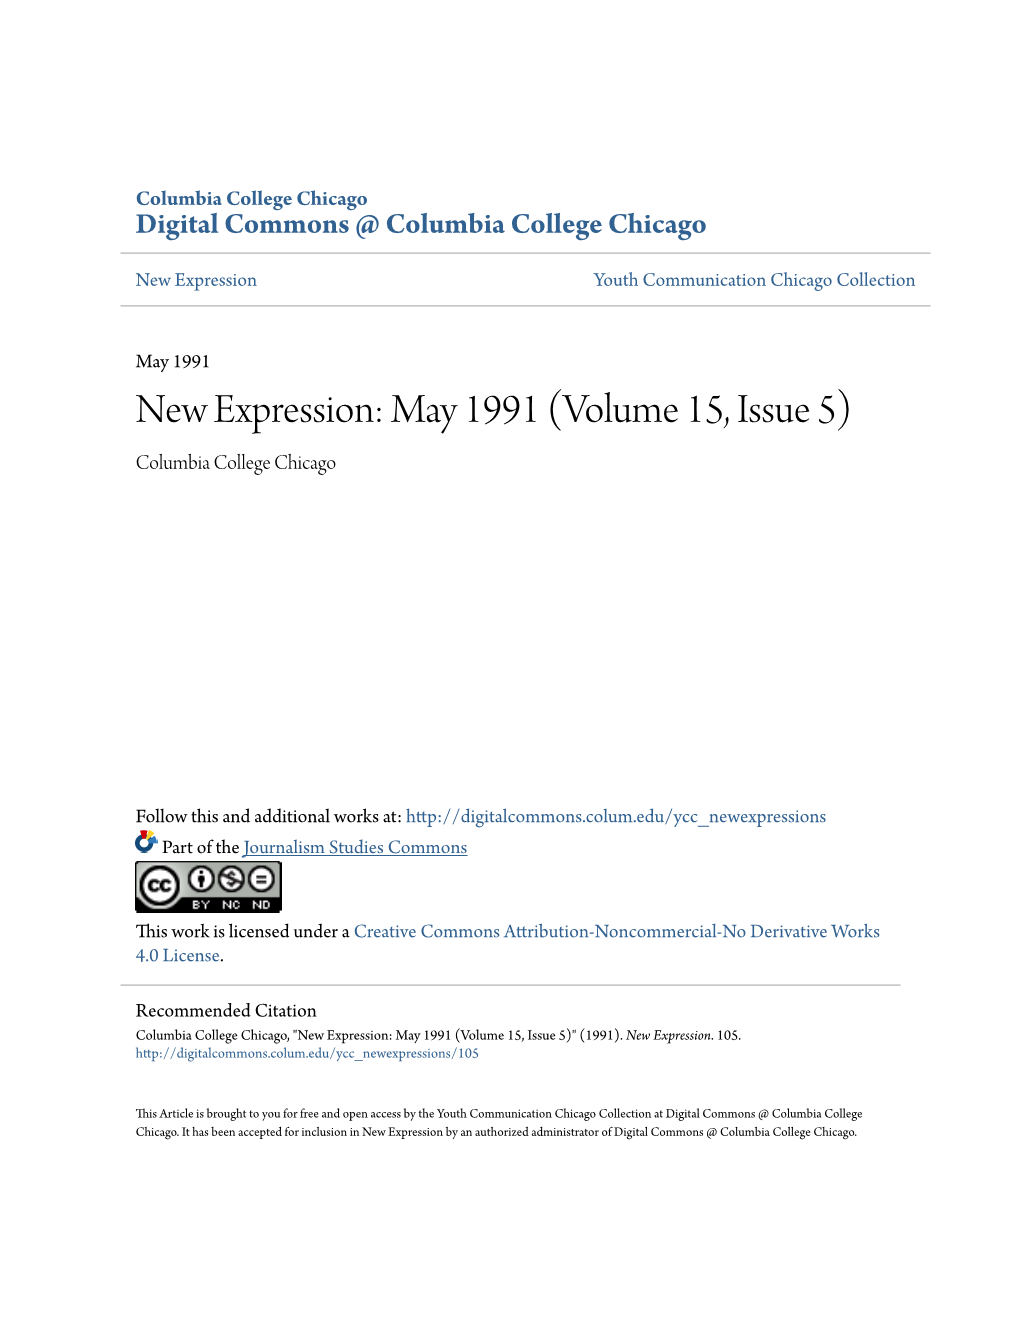 May 1991 New Expression: May 1991 (Volume 15, Issue 5) Columbia College Chicago